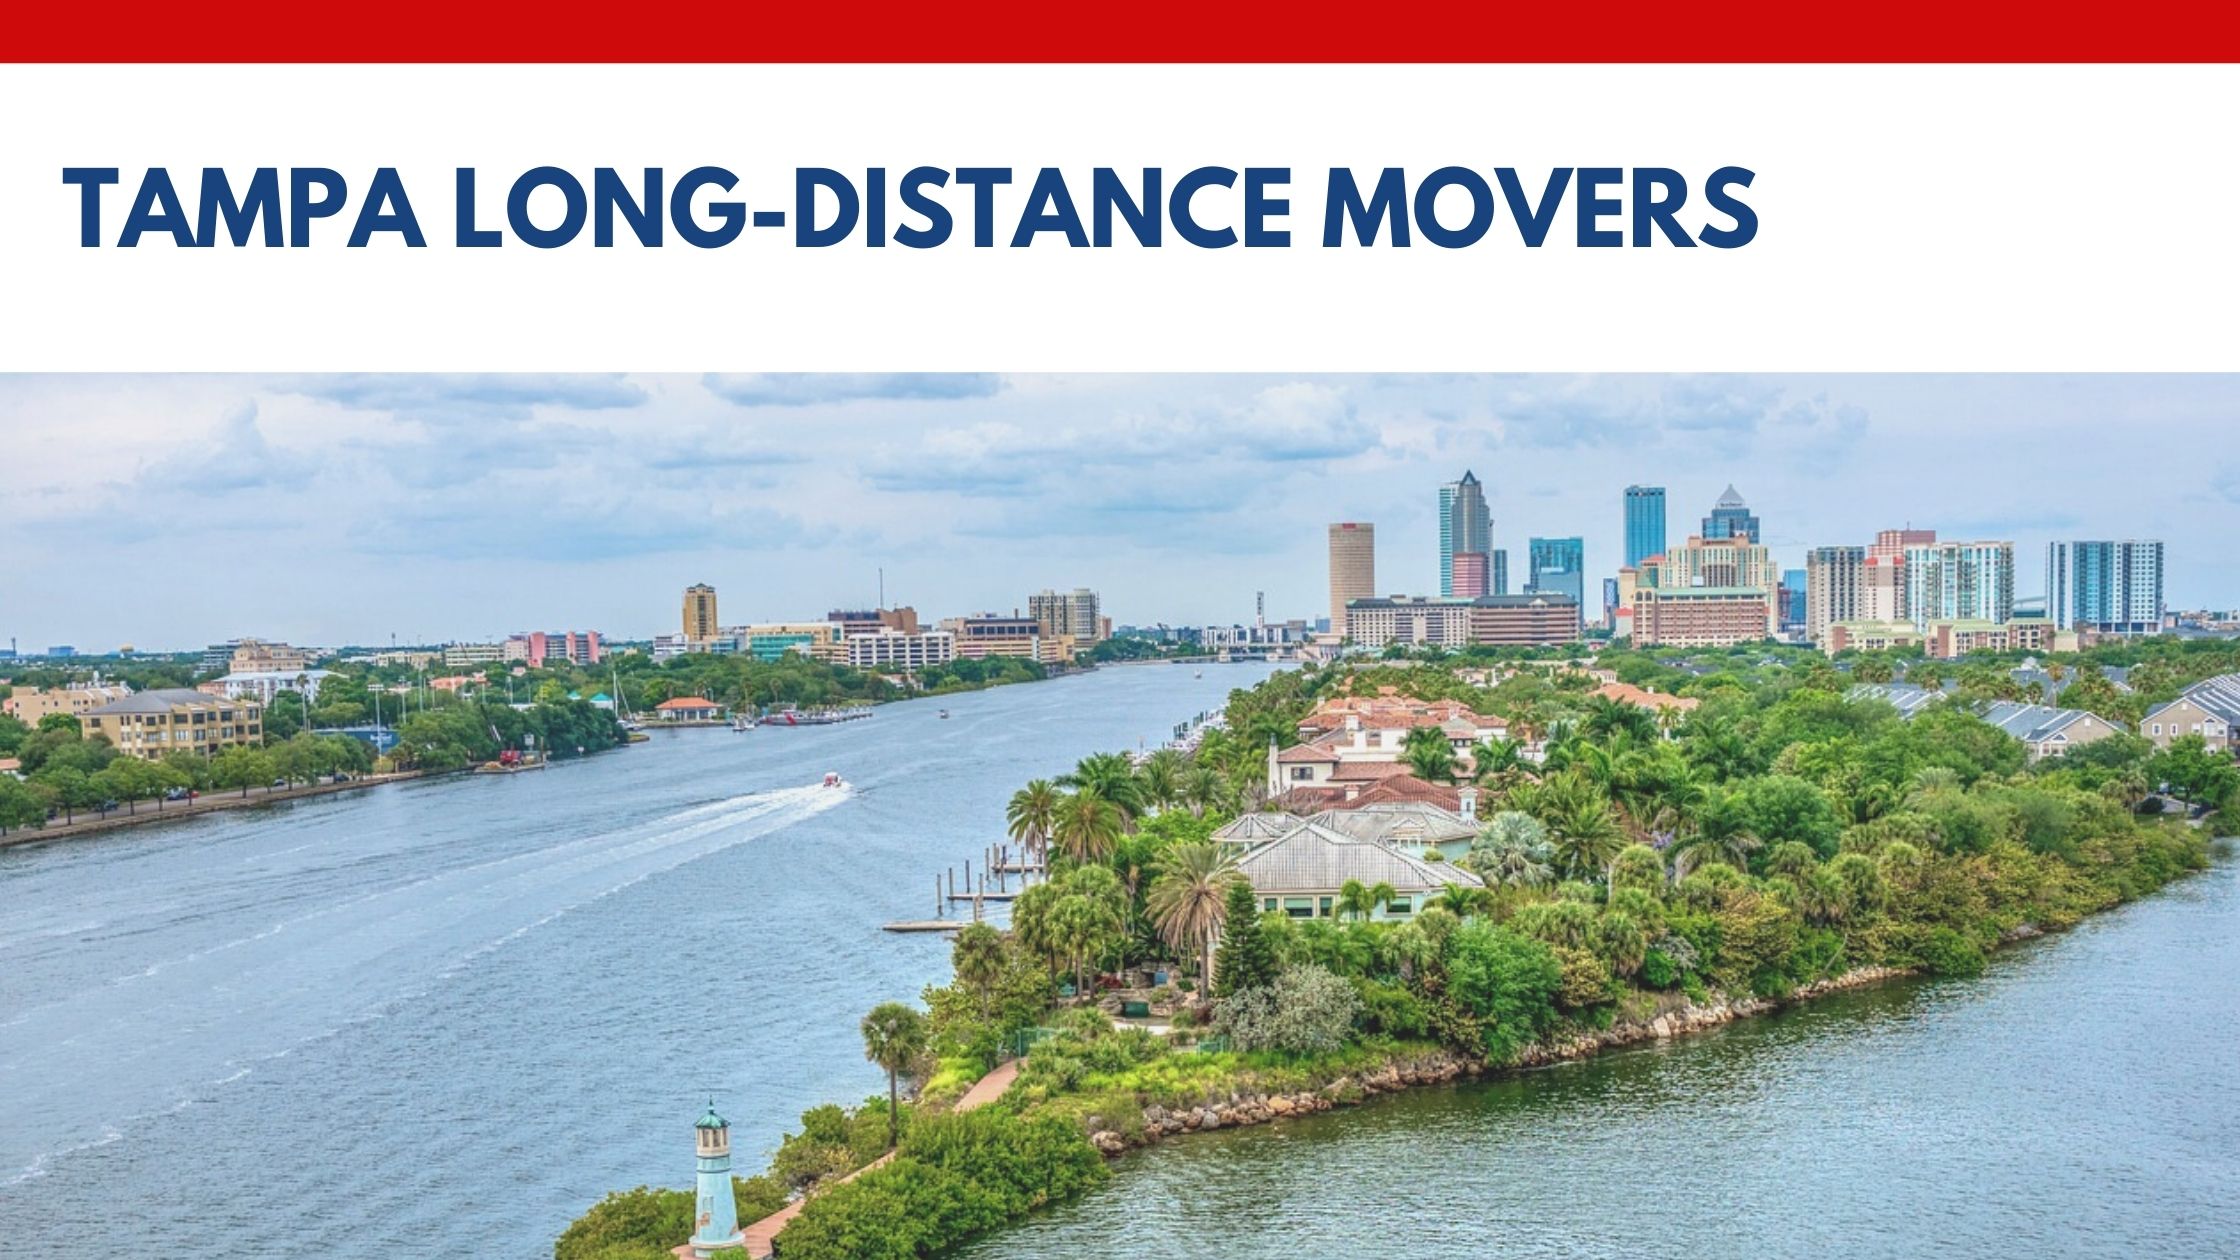 Tampa Long-Distance Movers